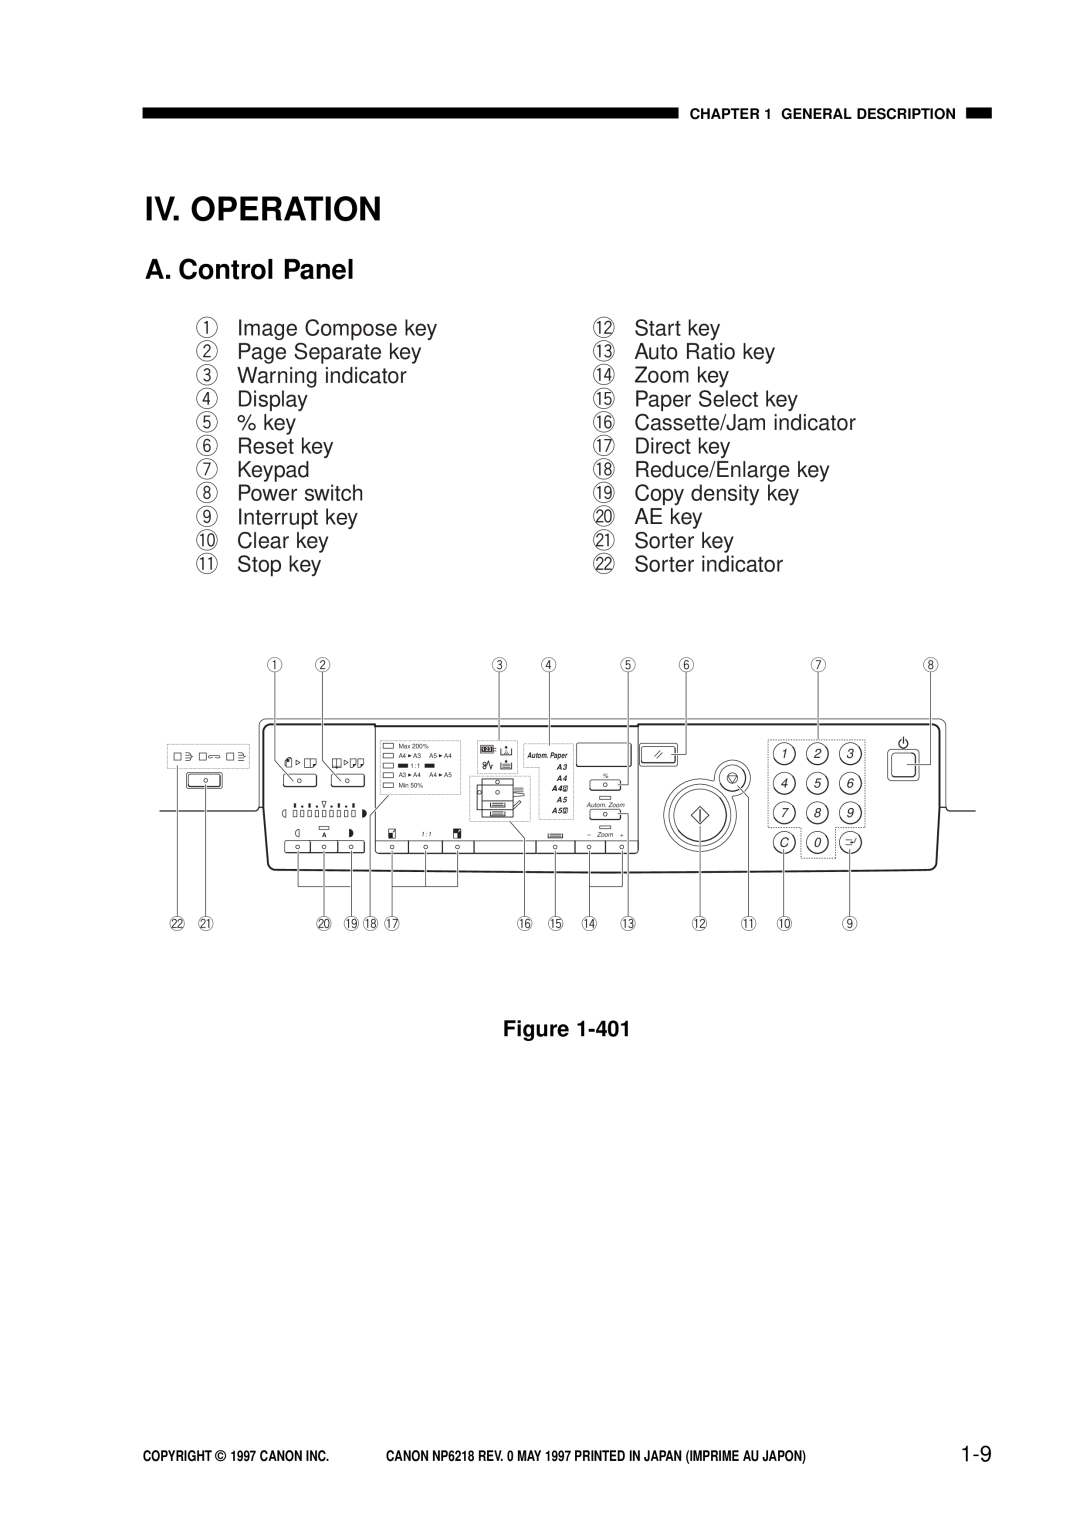 Canon NP6218, FY8-13EX-000 service manual Iv. Operation, A. Control Panel 